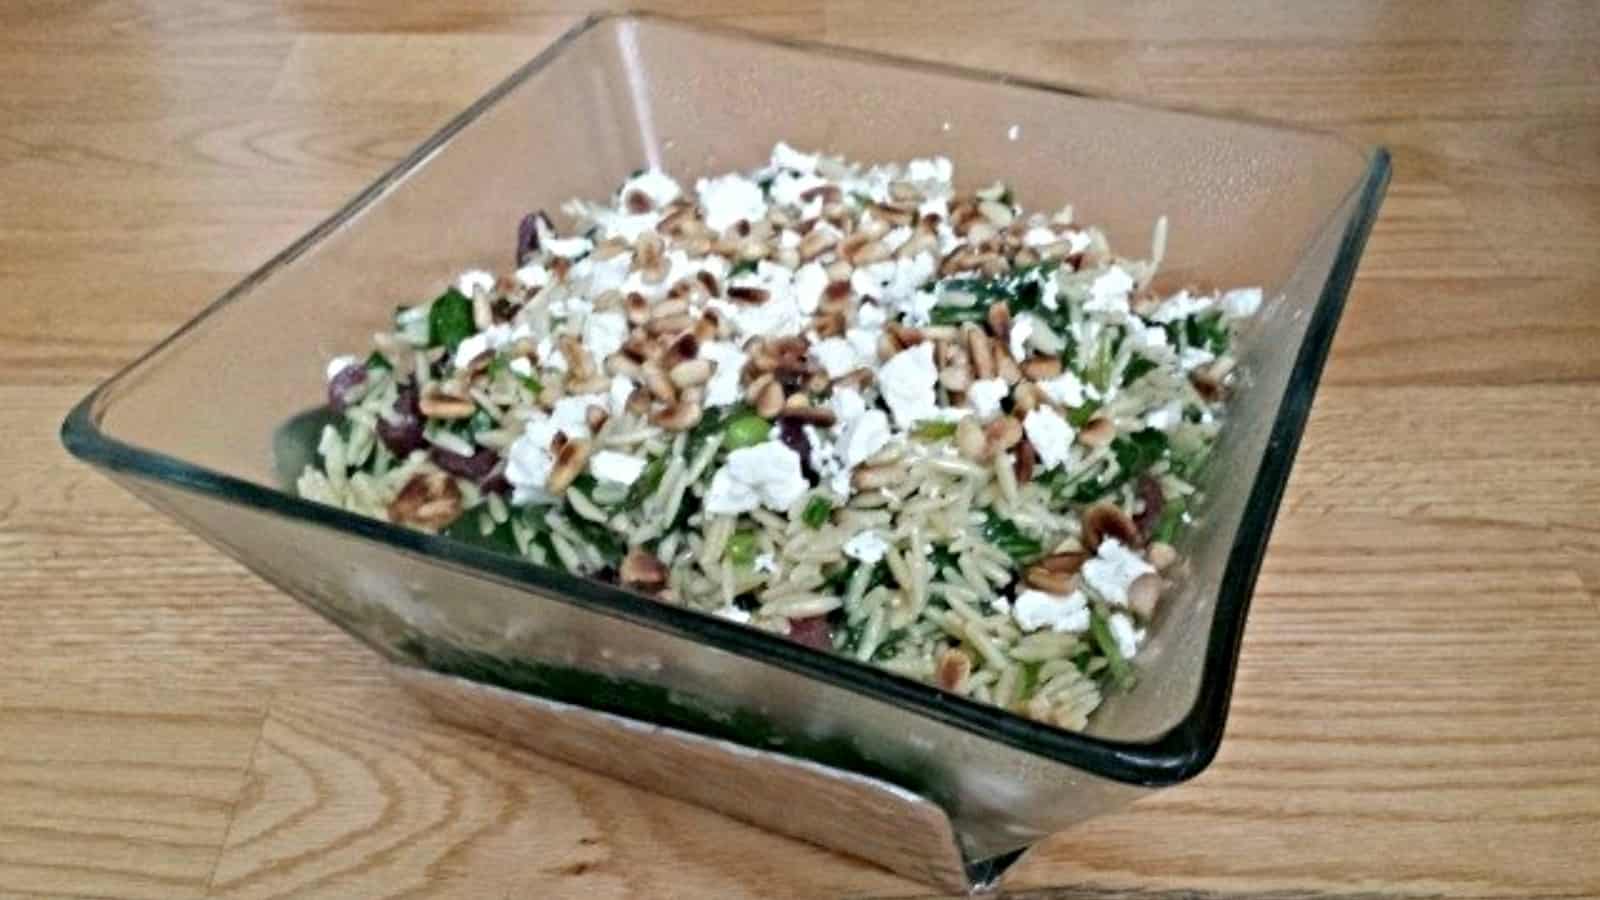 This photo shows a spinach orzo salad in a square glass bowl sitting on a black granite countertop.